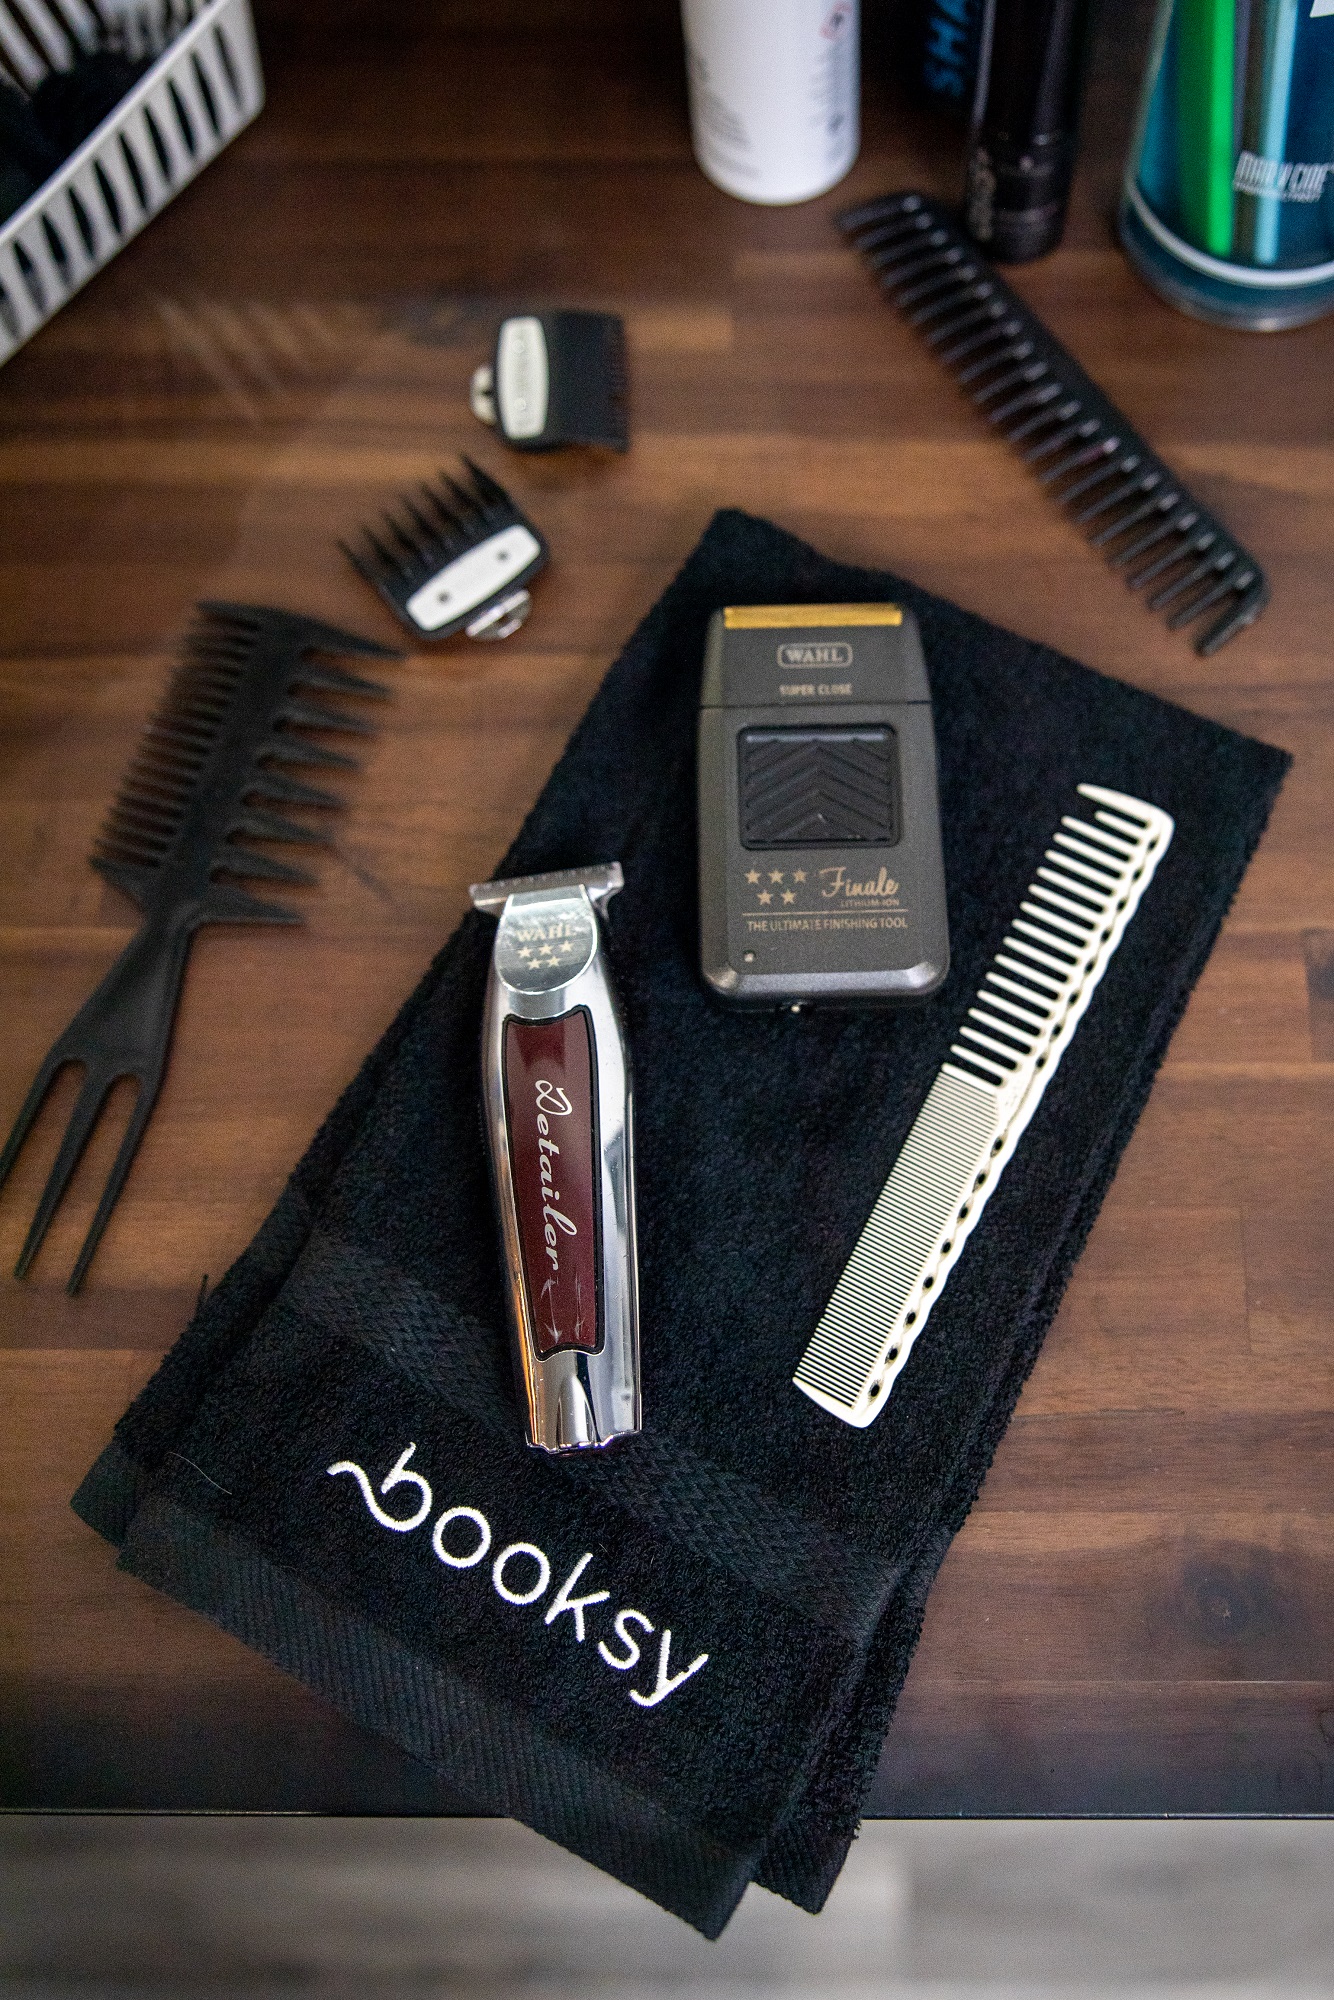 Tools with Booksy logo